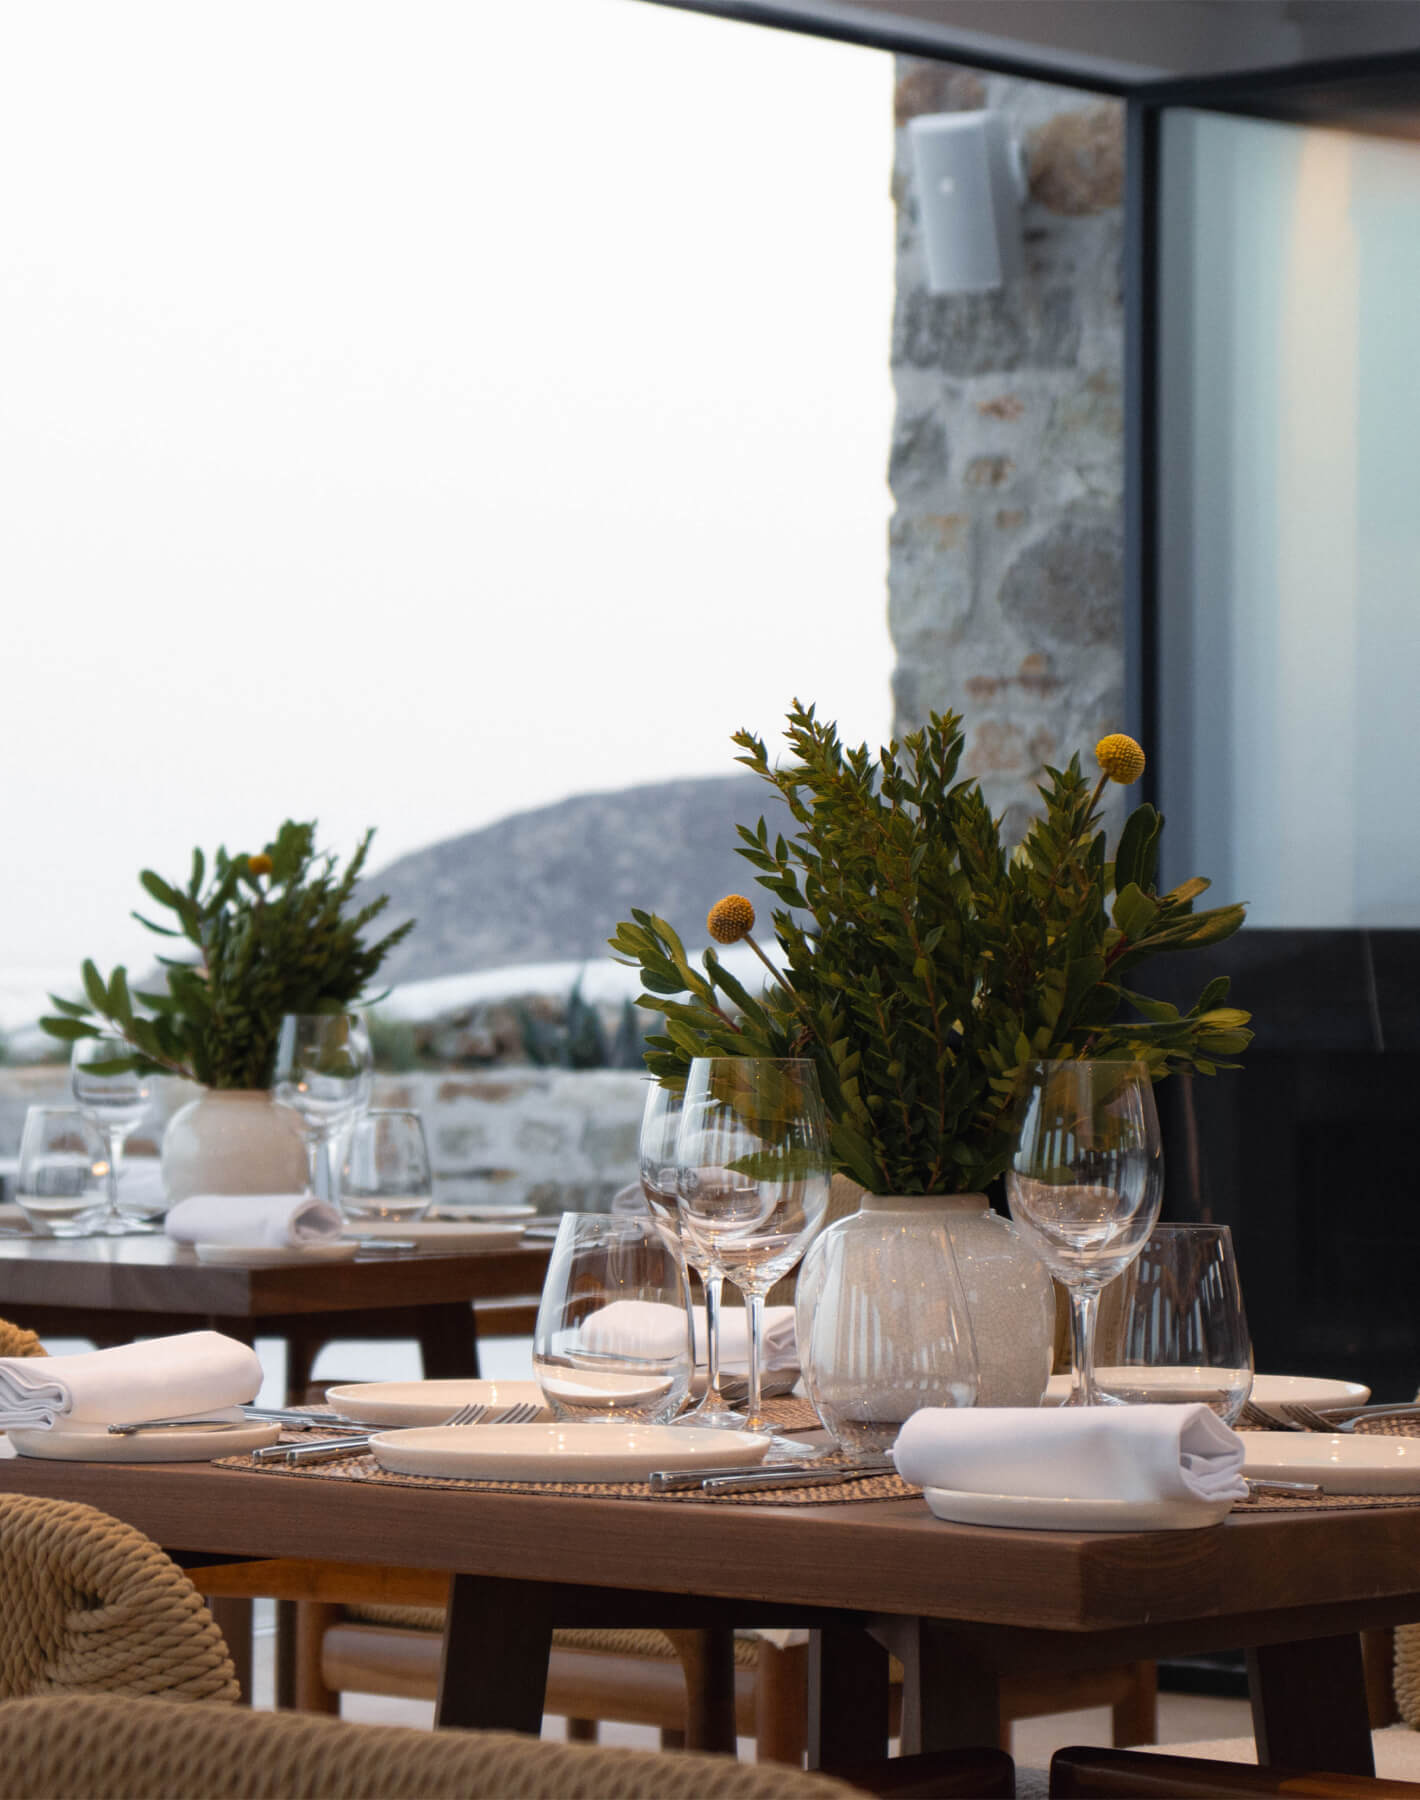 Dine in luxury with stunning Aegean Sea views at The Lounge, Cali Mykonos. Table set for dinner overlooking the azure waters, creating an unforgettable ambiance of elegance and tranquility.